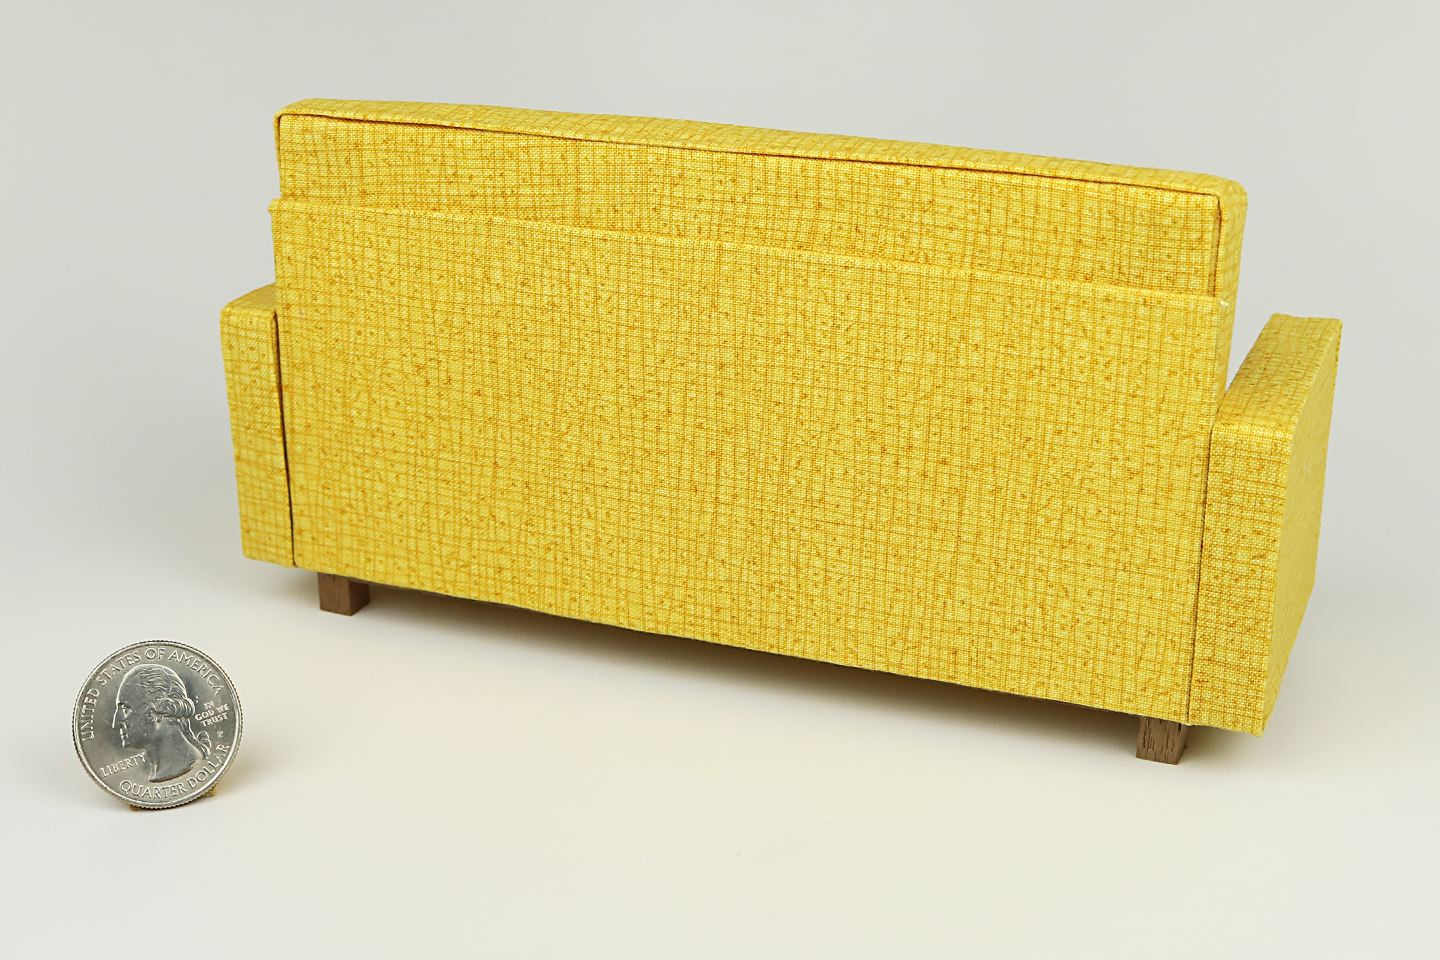 Mid Century Modern Living Room in "Maize"